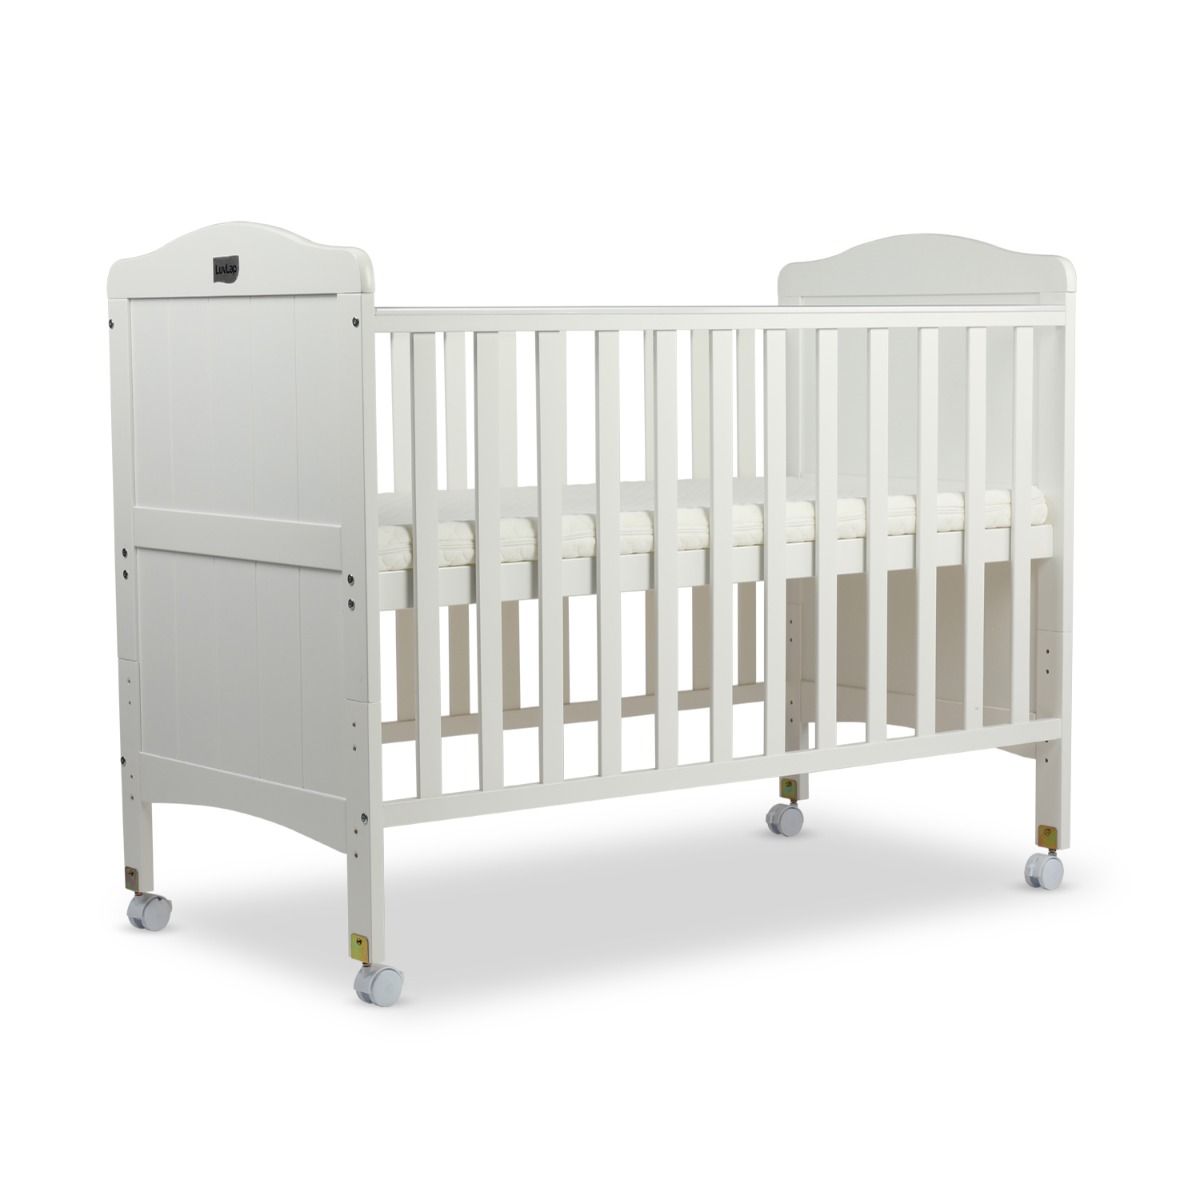 LuvLap Cot C-65 Wooden Baby Cot for Kids with Mattress, White